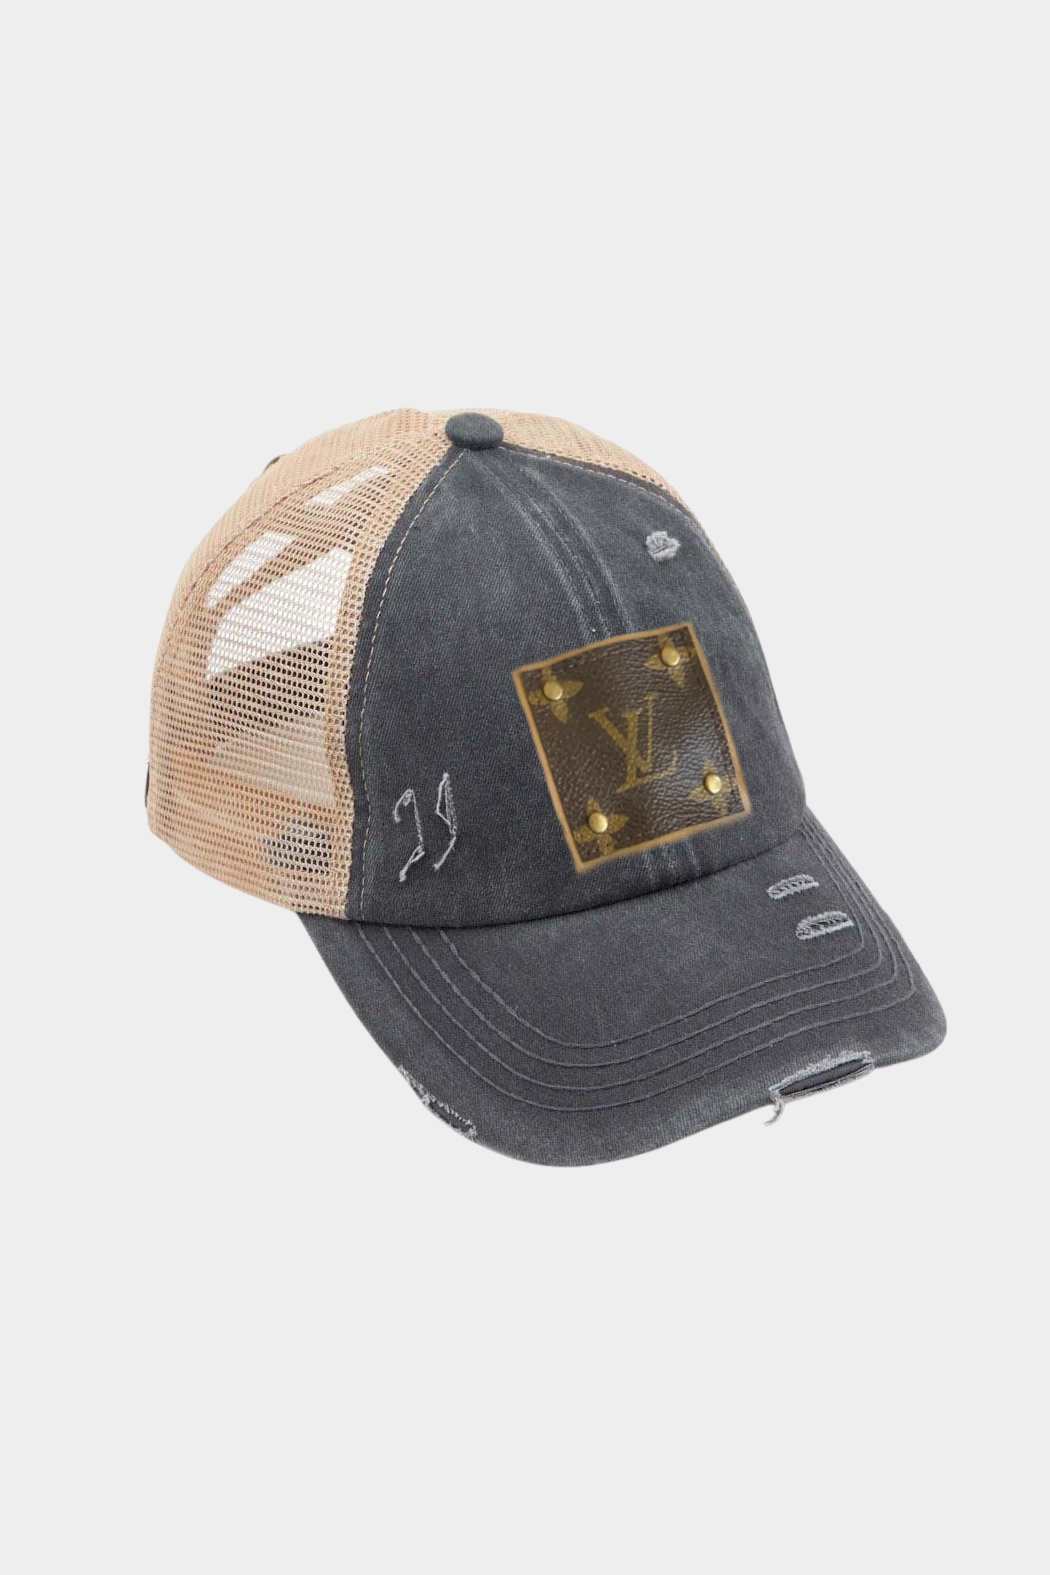 Up-Cycled Distressed Trucker Cap